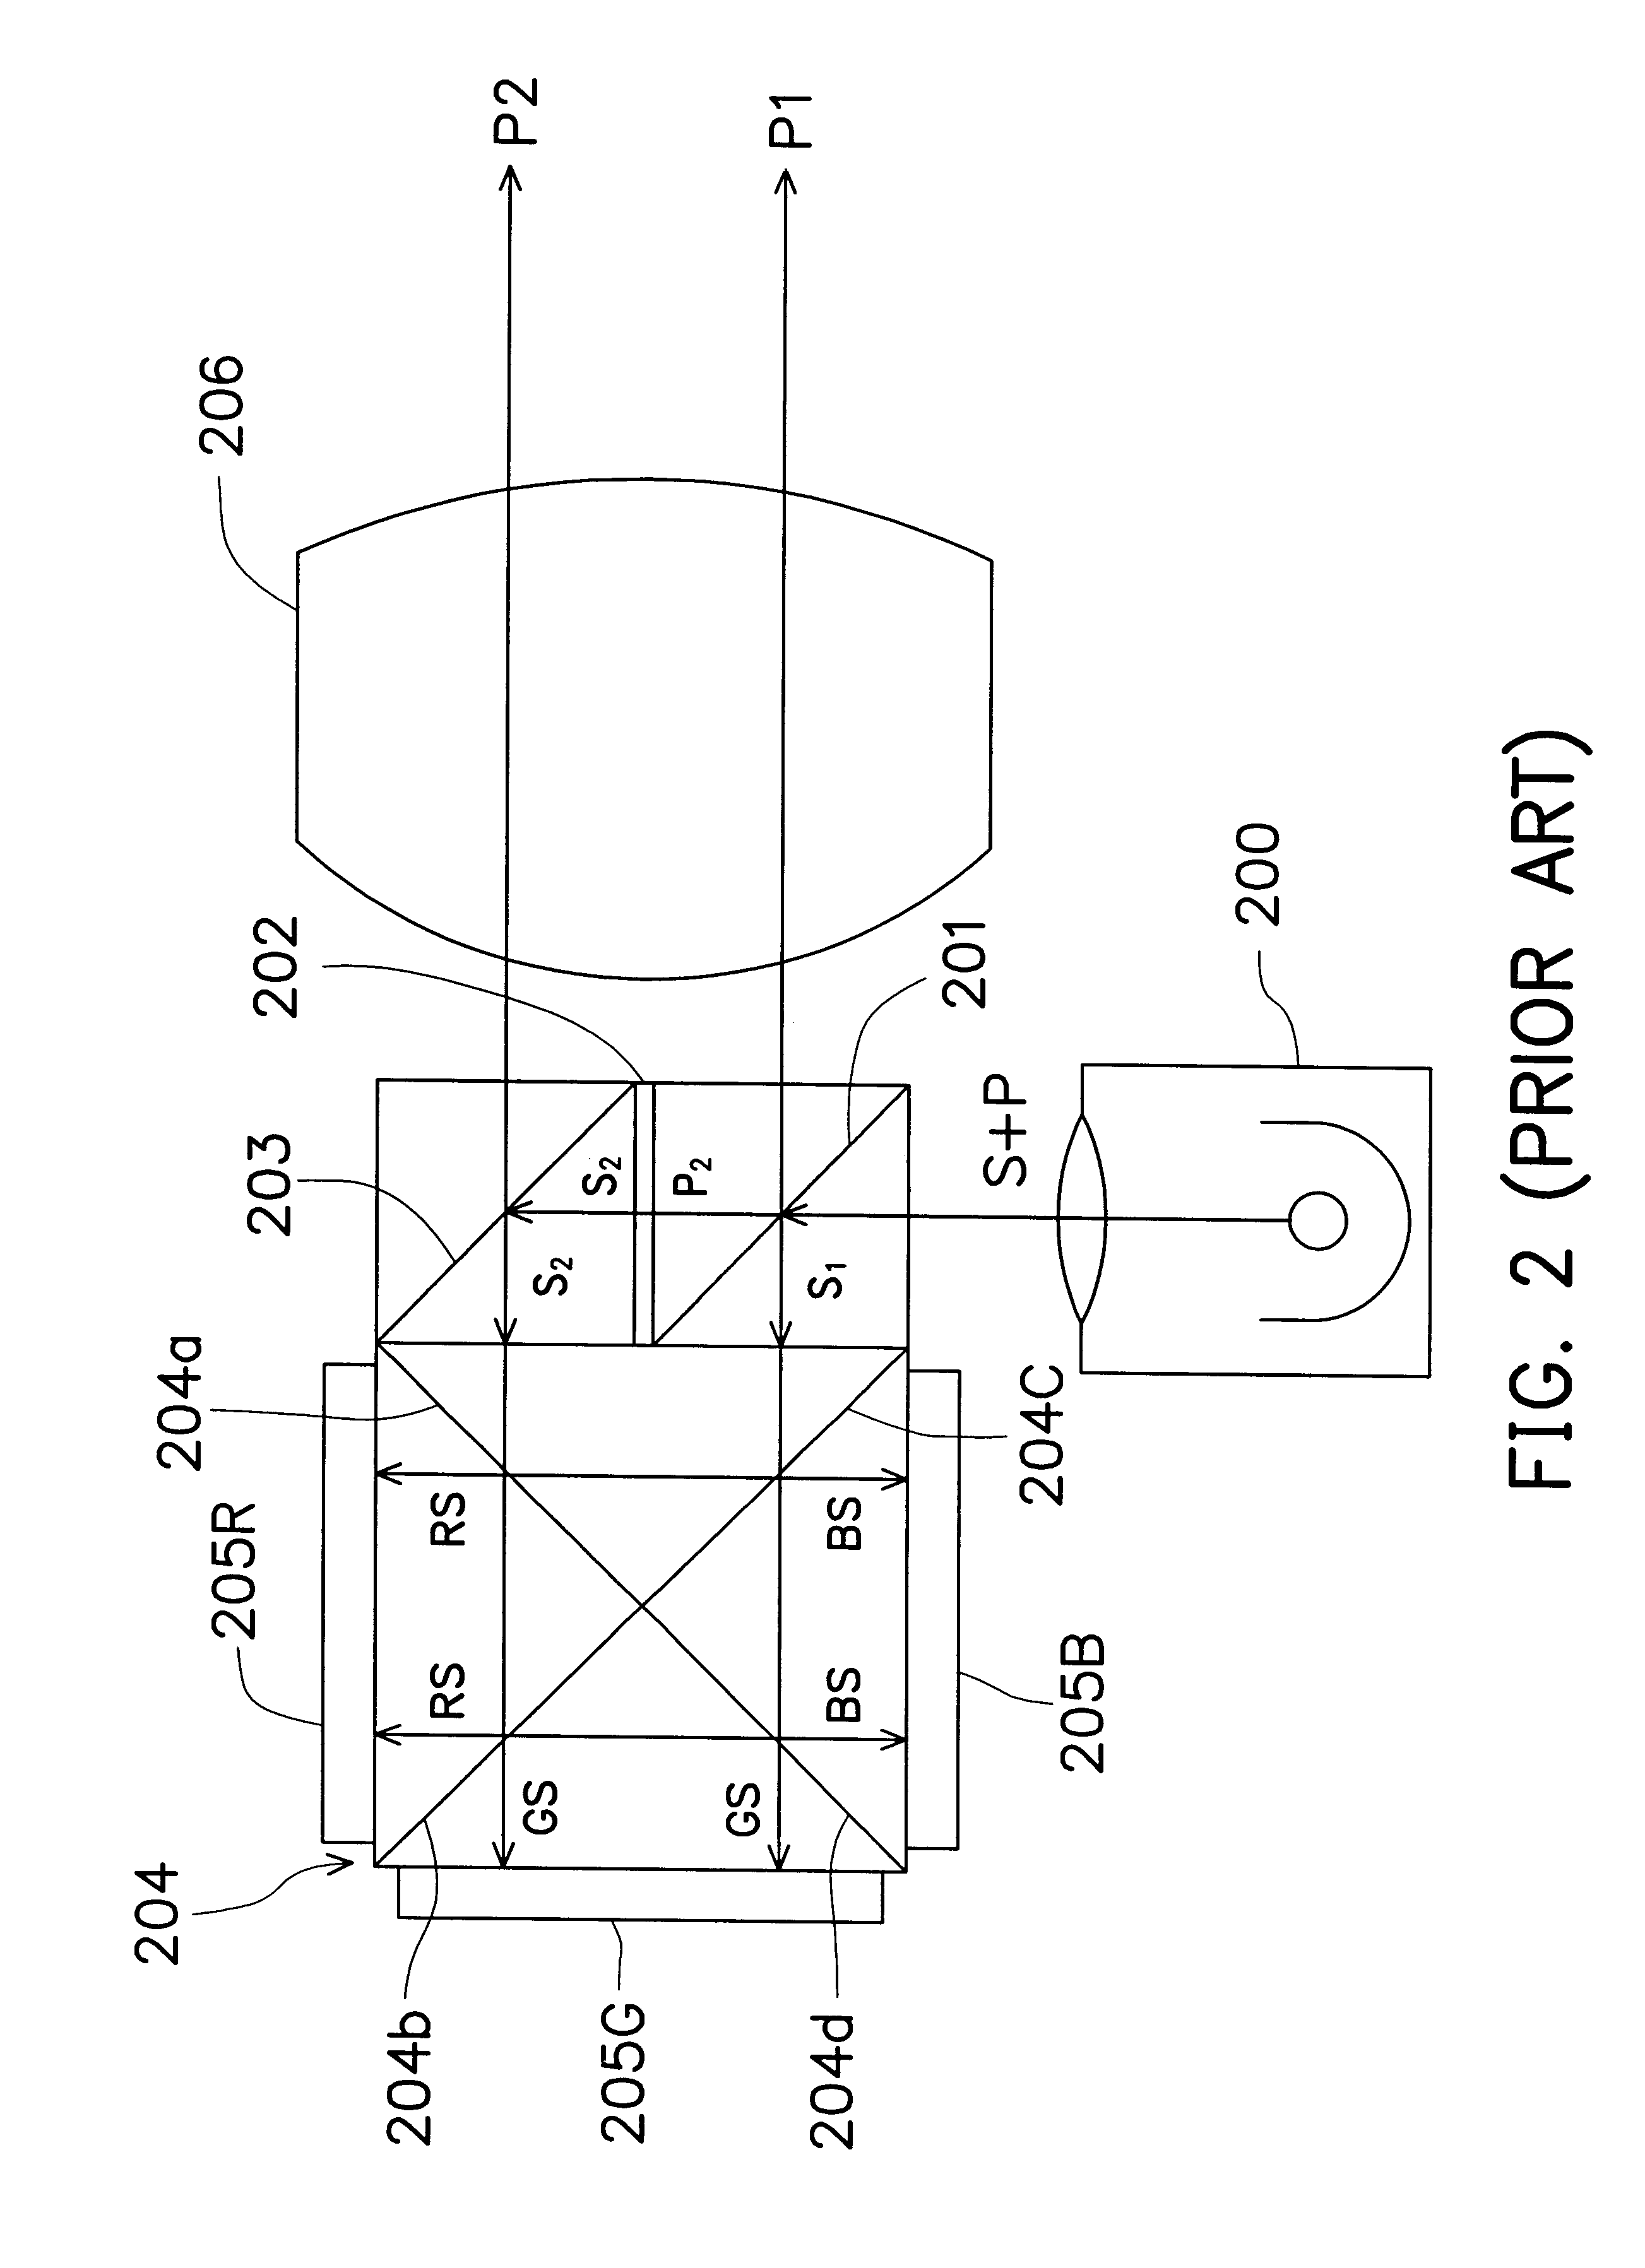 Liquid crystal display system and light projection system